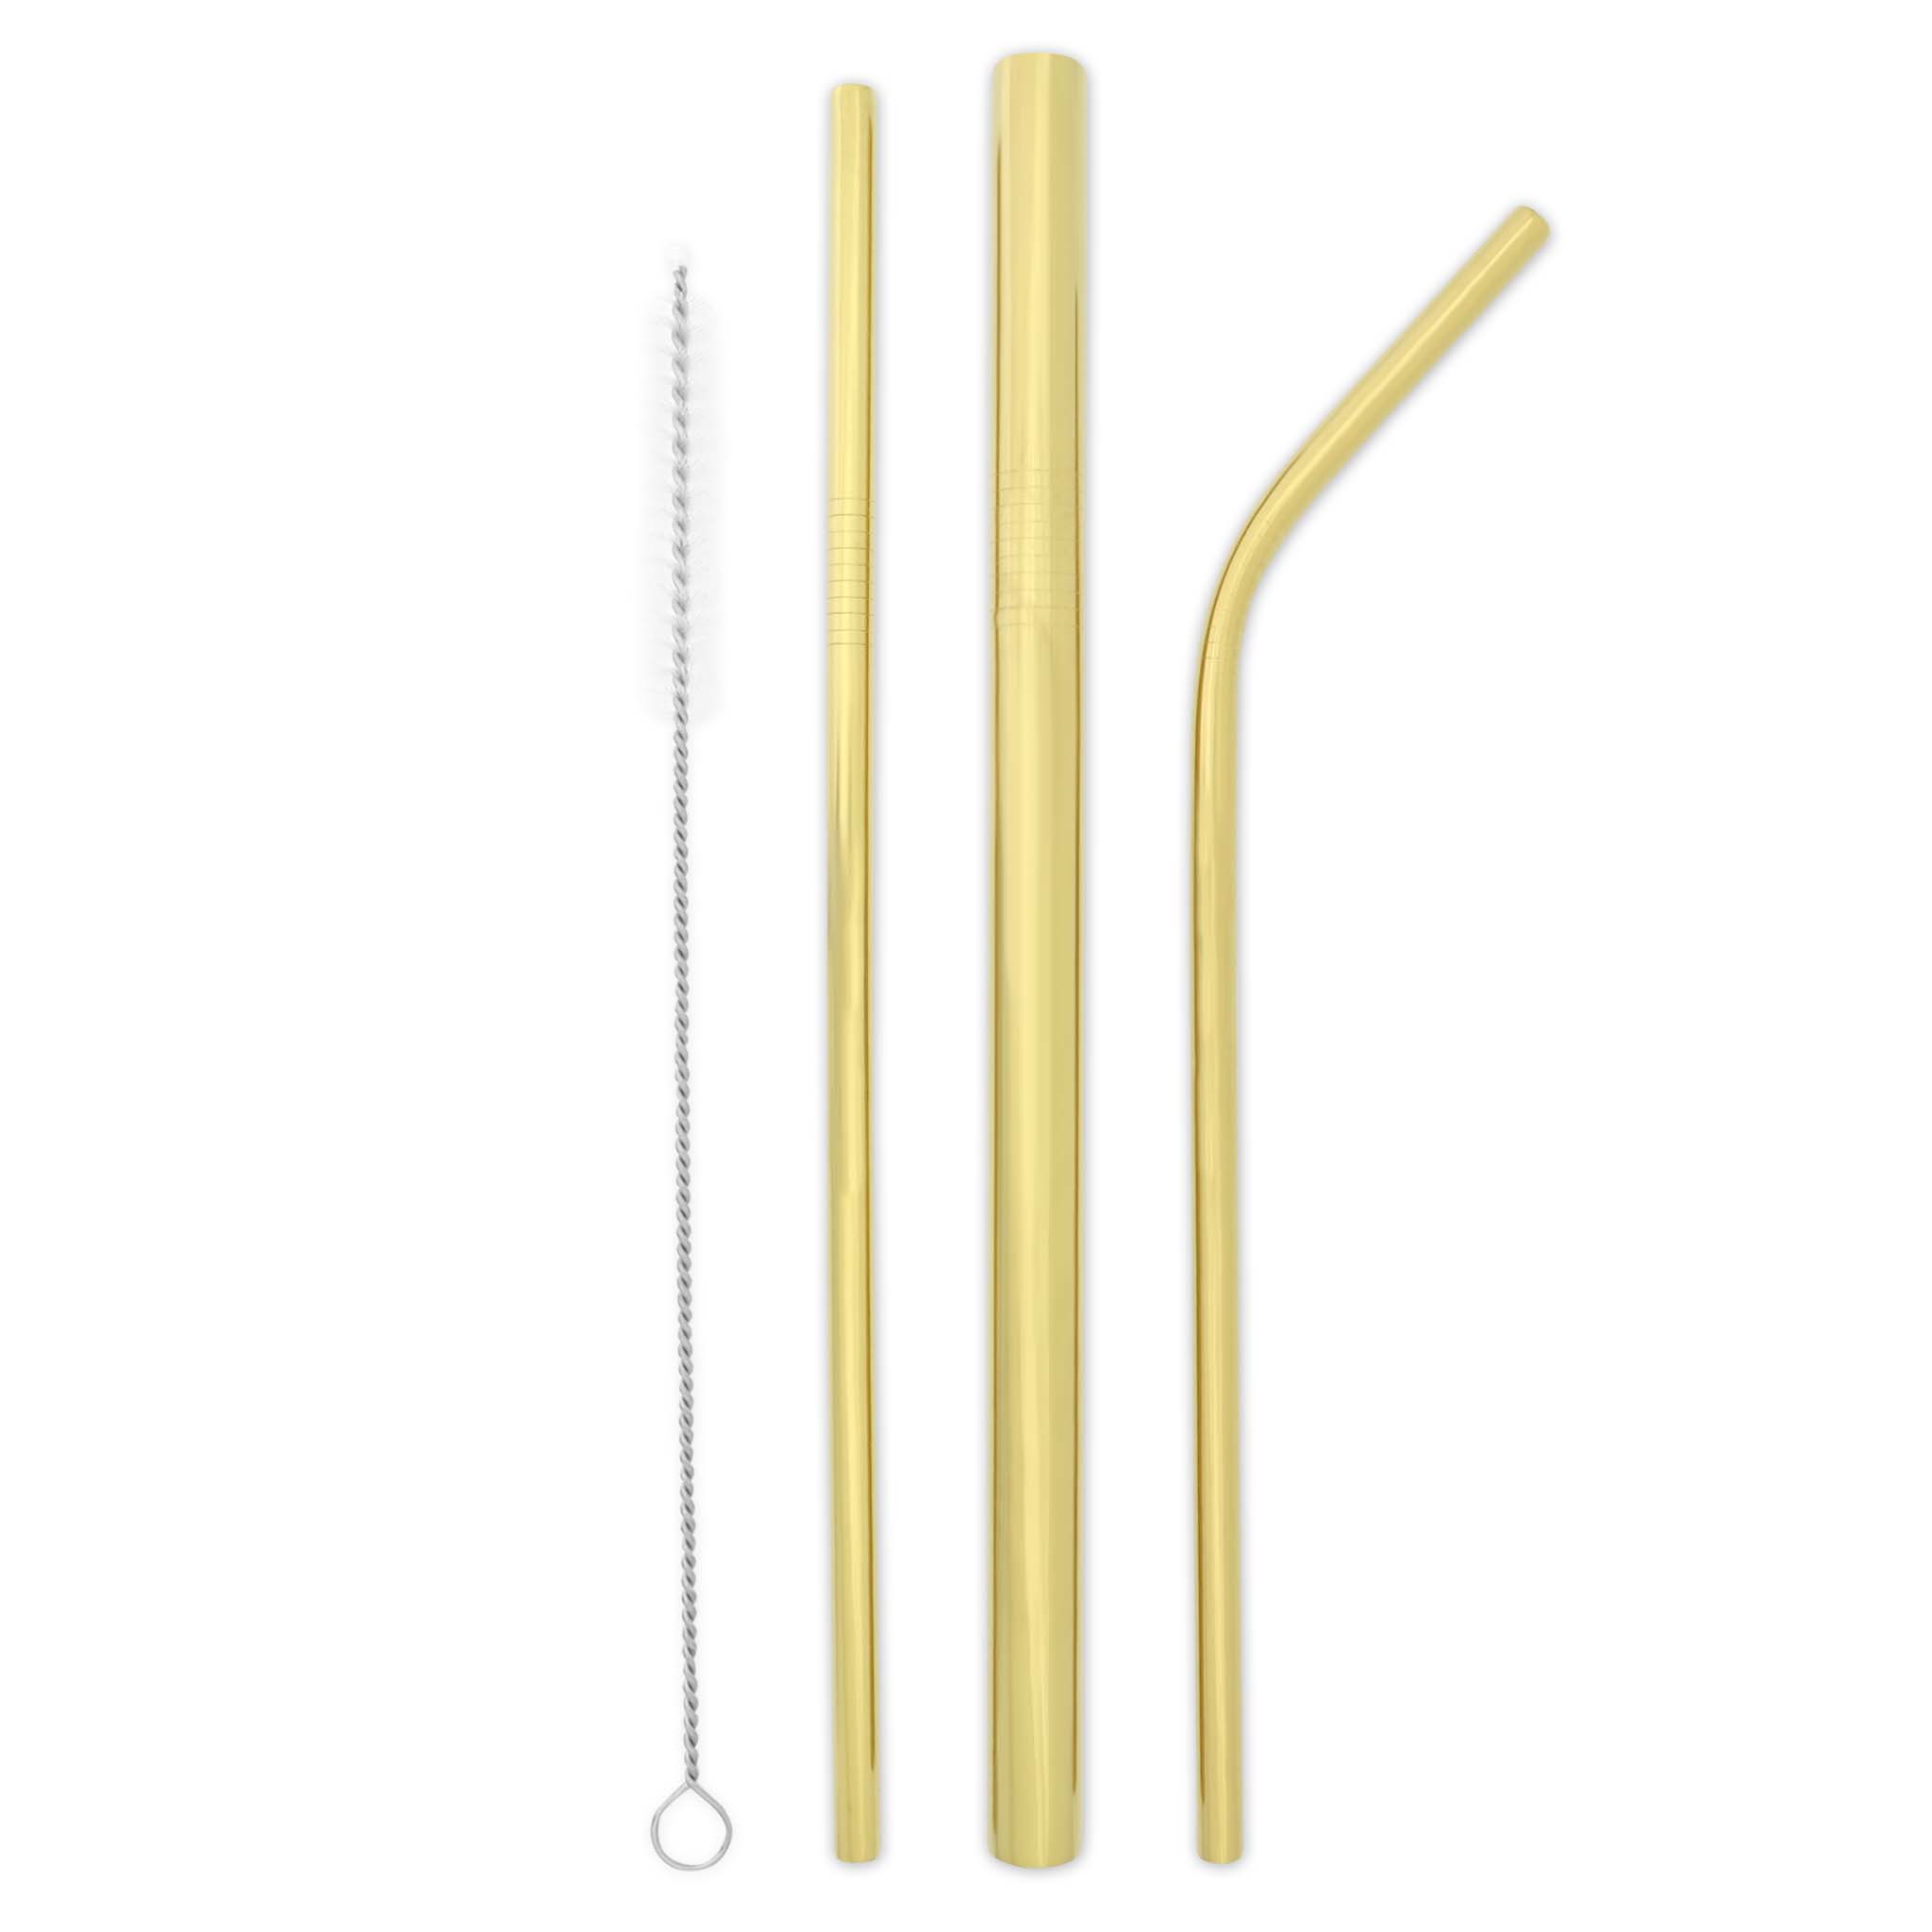 Triple Threat Stainless Steel Straw Set with Travel Pouch (Gold)